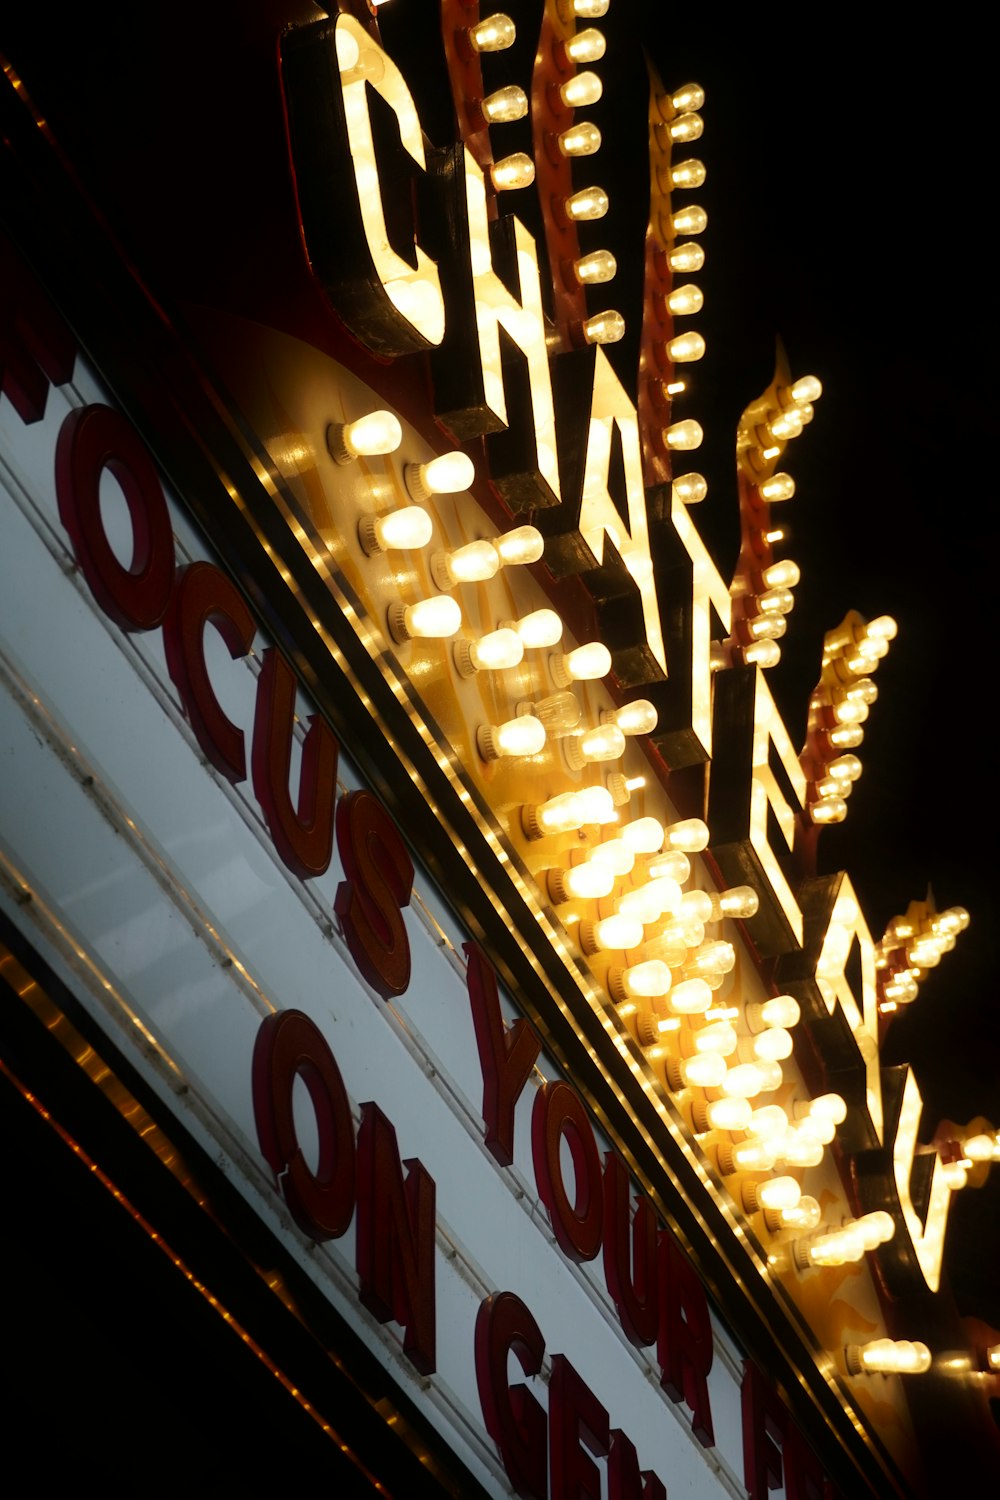 a theater sign lit up at night with lights